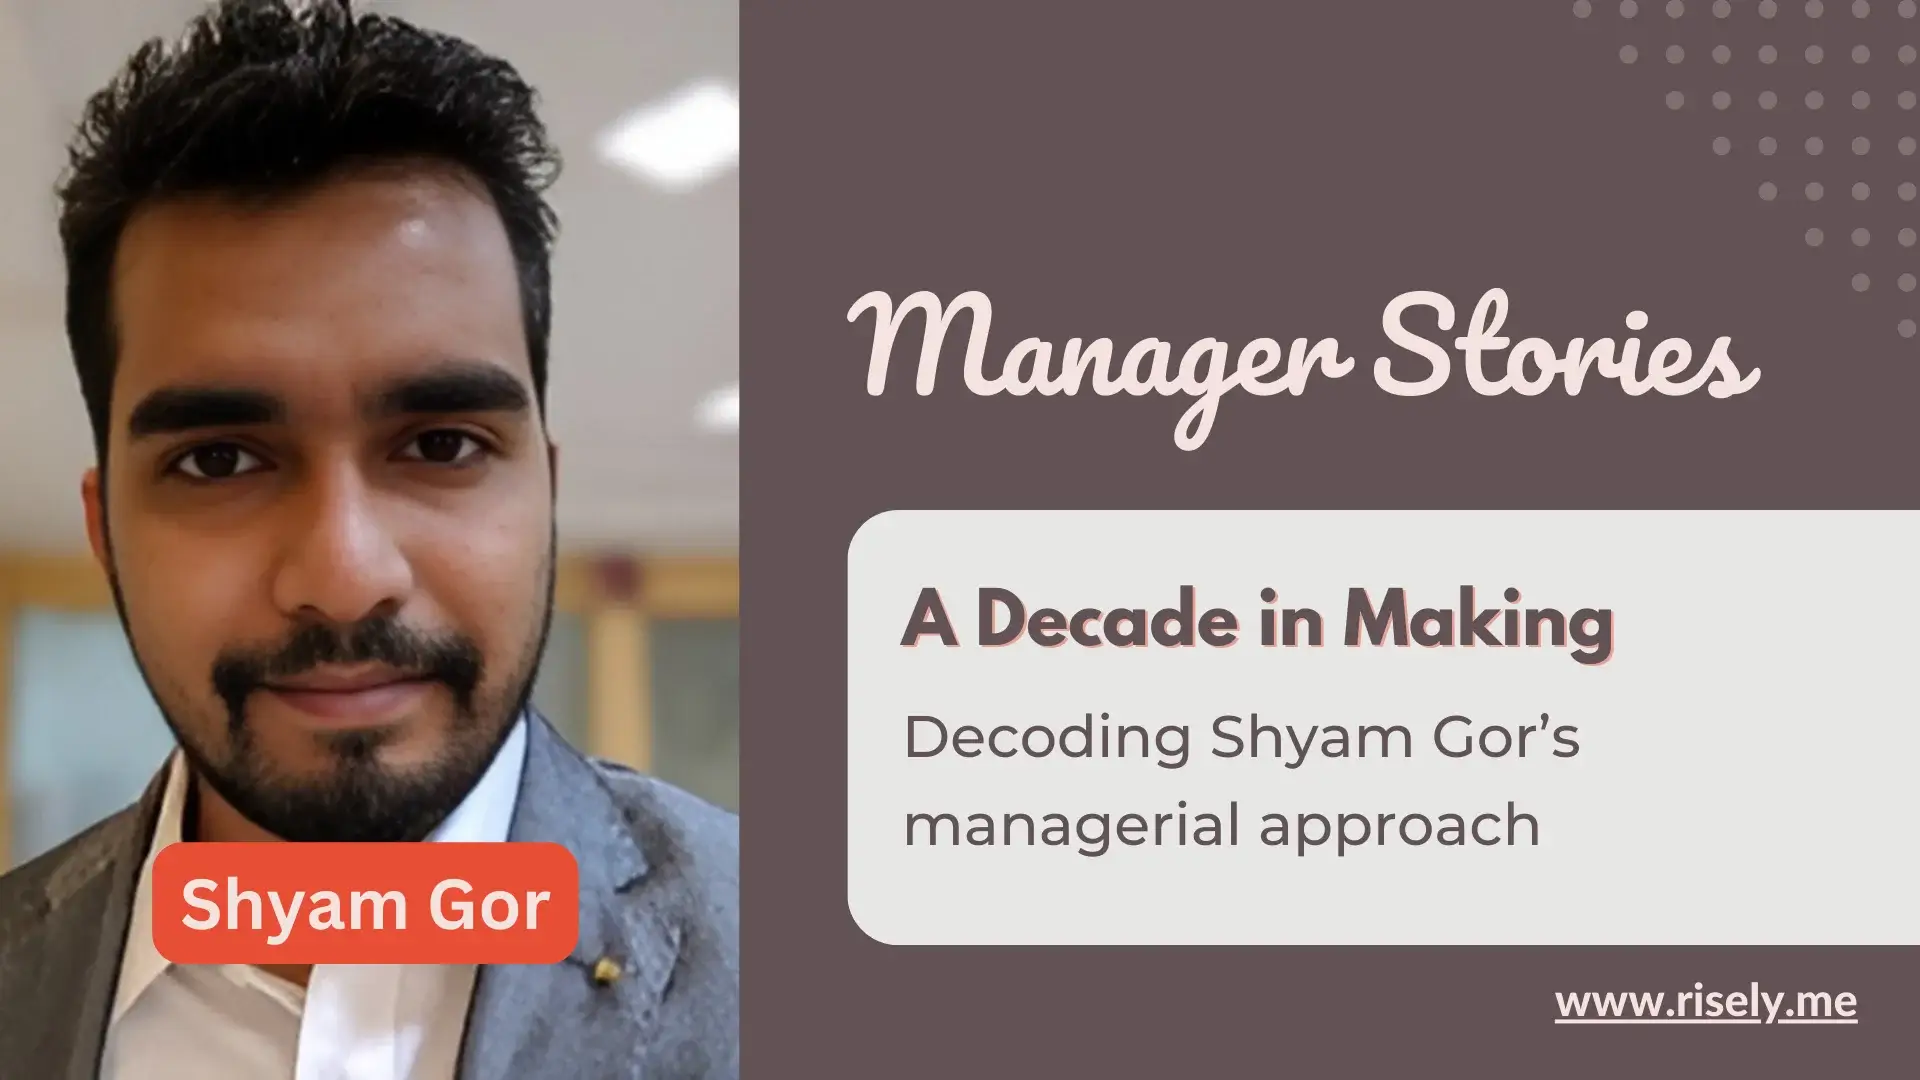 A Decade in Making: Decoding Shyam Gor’s Managerial Approach